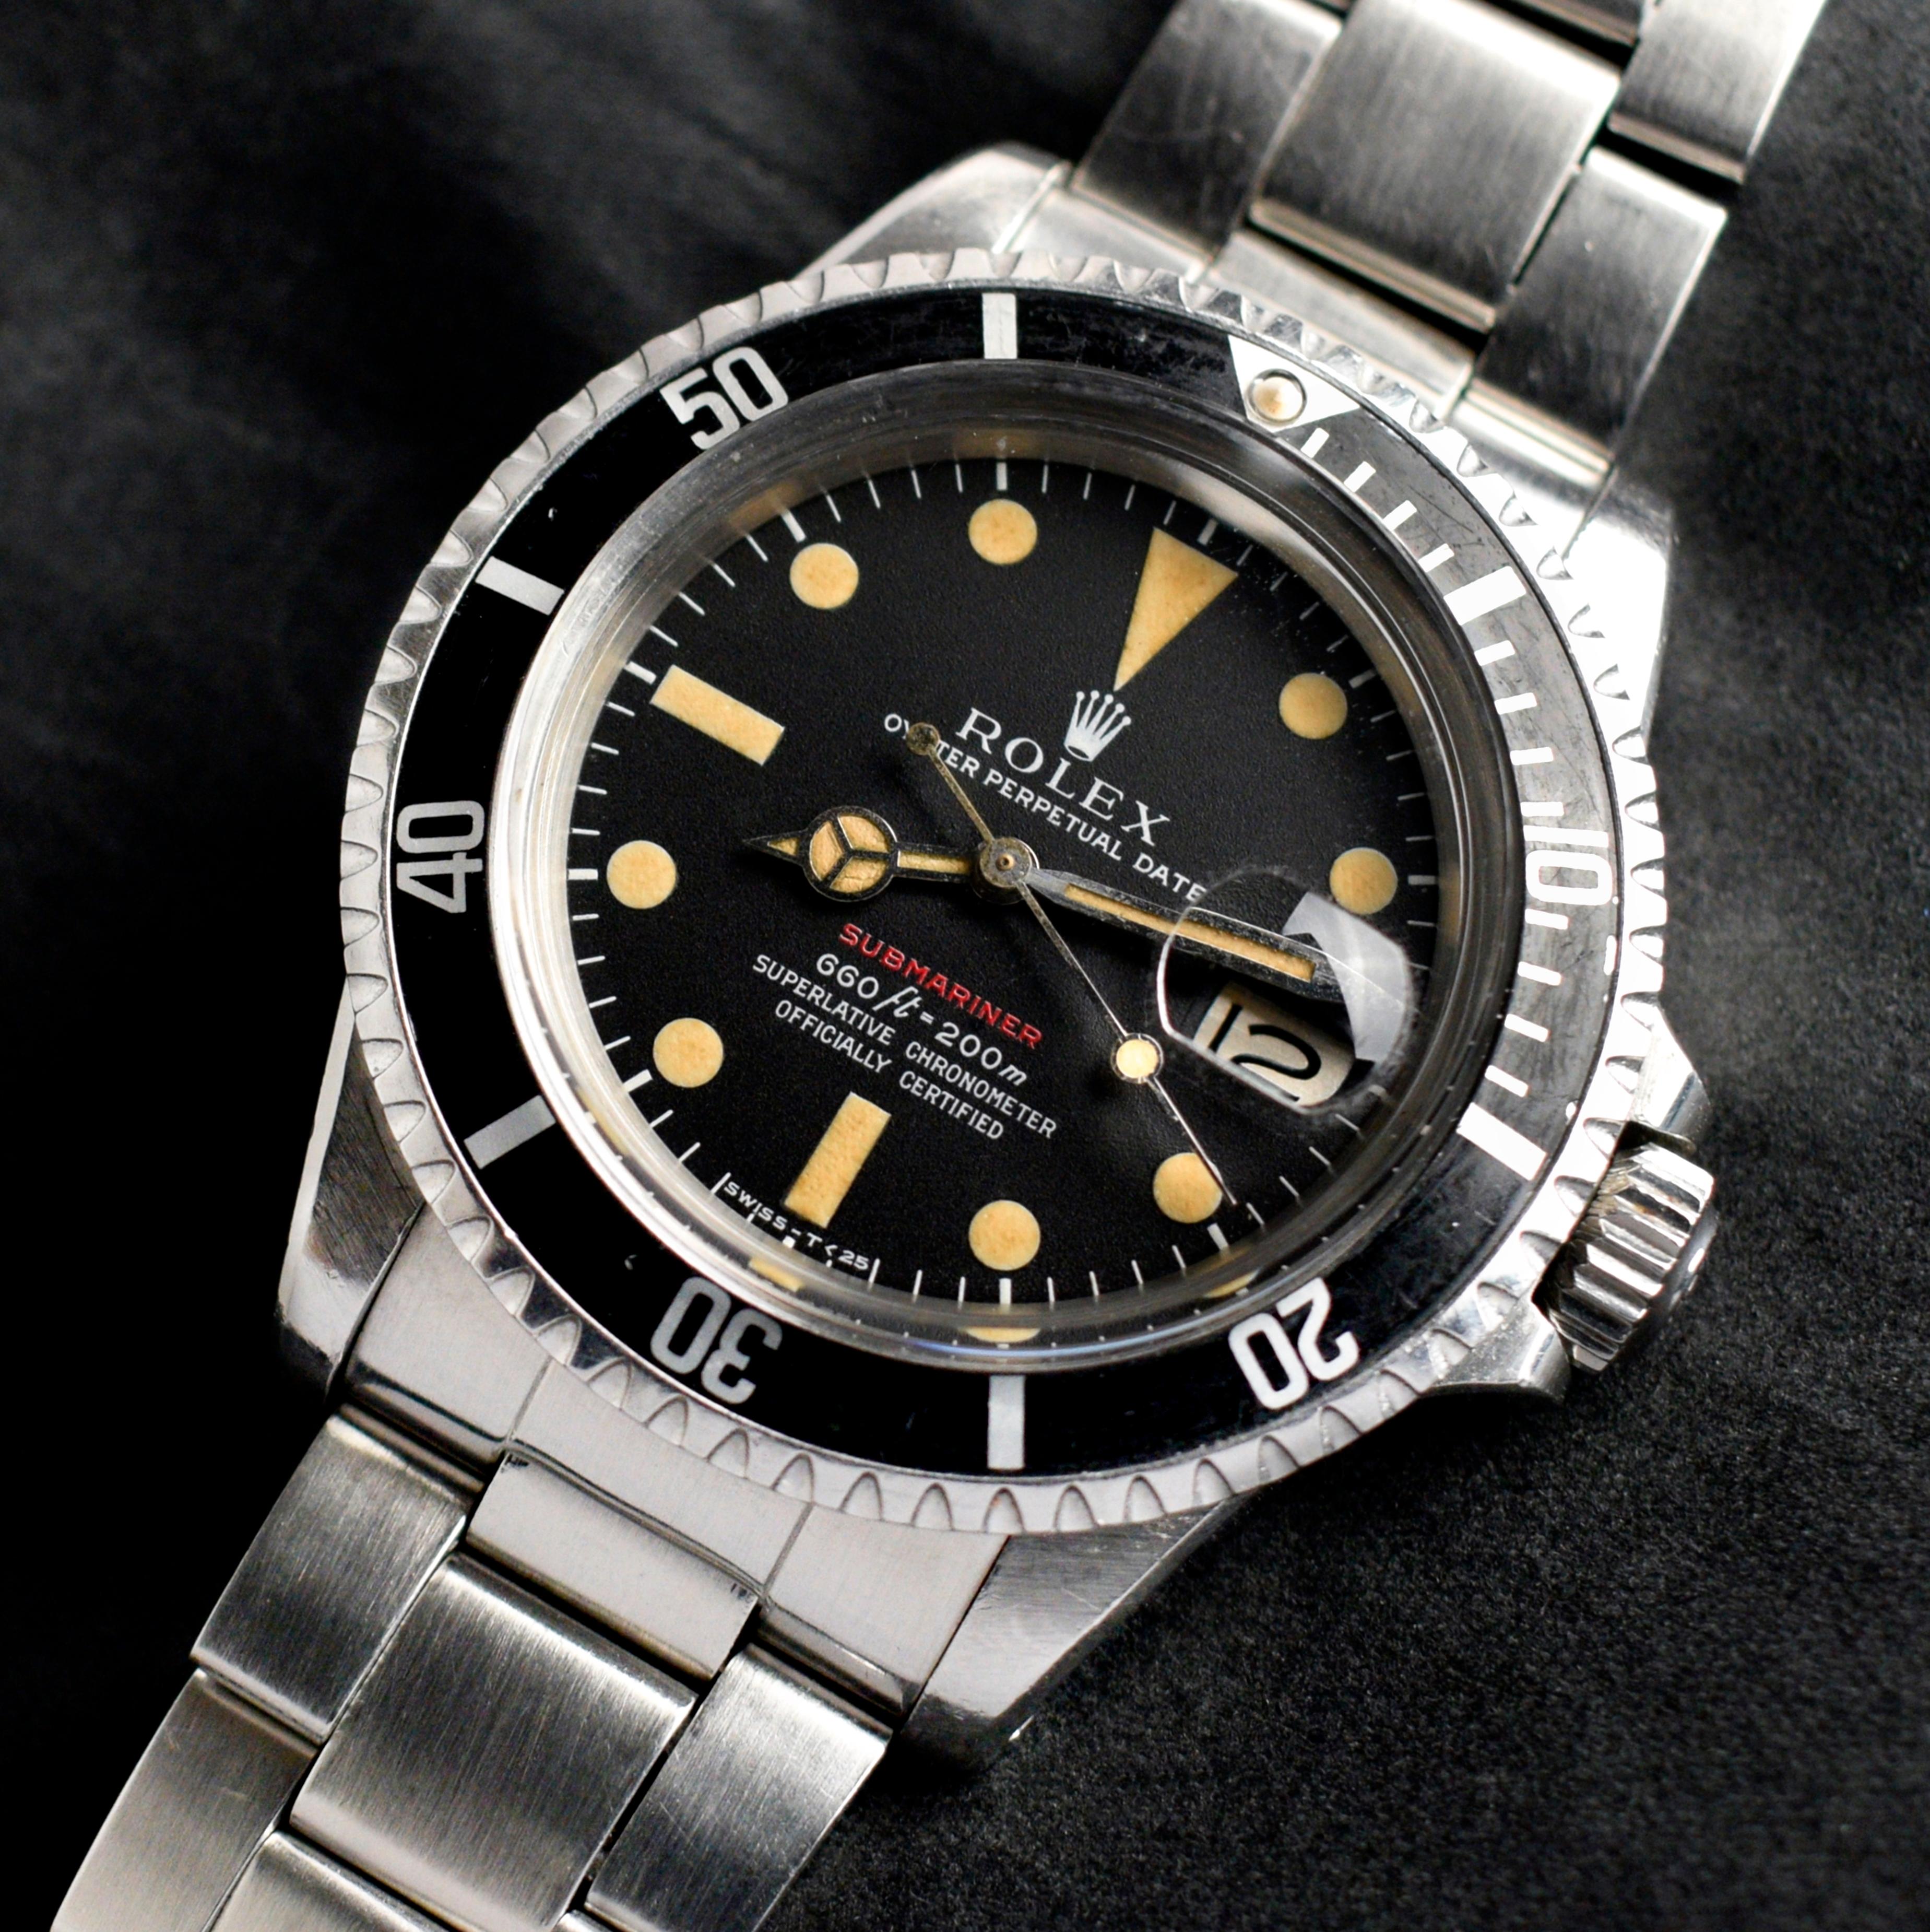 Brand: Vintage Rolex
Model: 1680
Year: 1971
Serial number: 31xxxxx
Reference: OT1589

Case: Show sign of wear with very slight light polish from previous; still in very thick strong condition; inner case back stamped 1680 III 71

Dial: Excellent